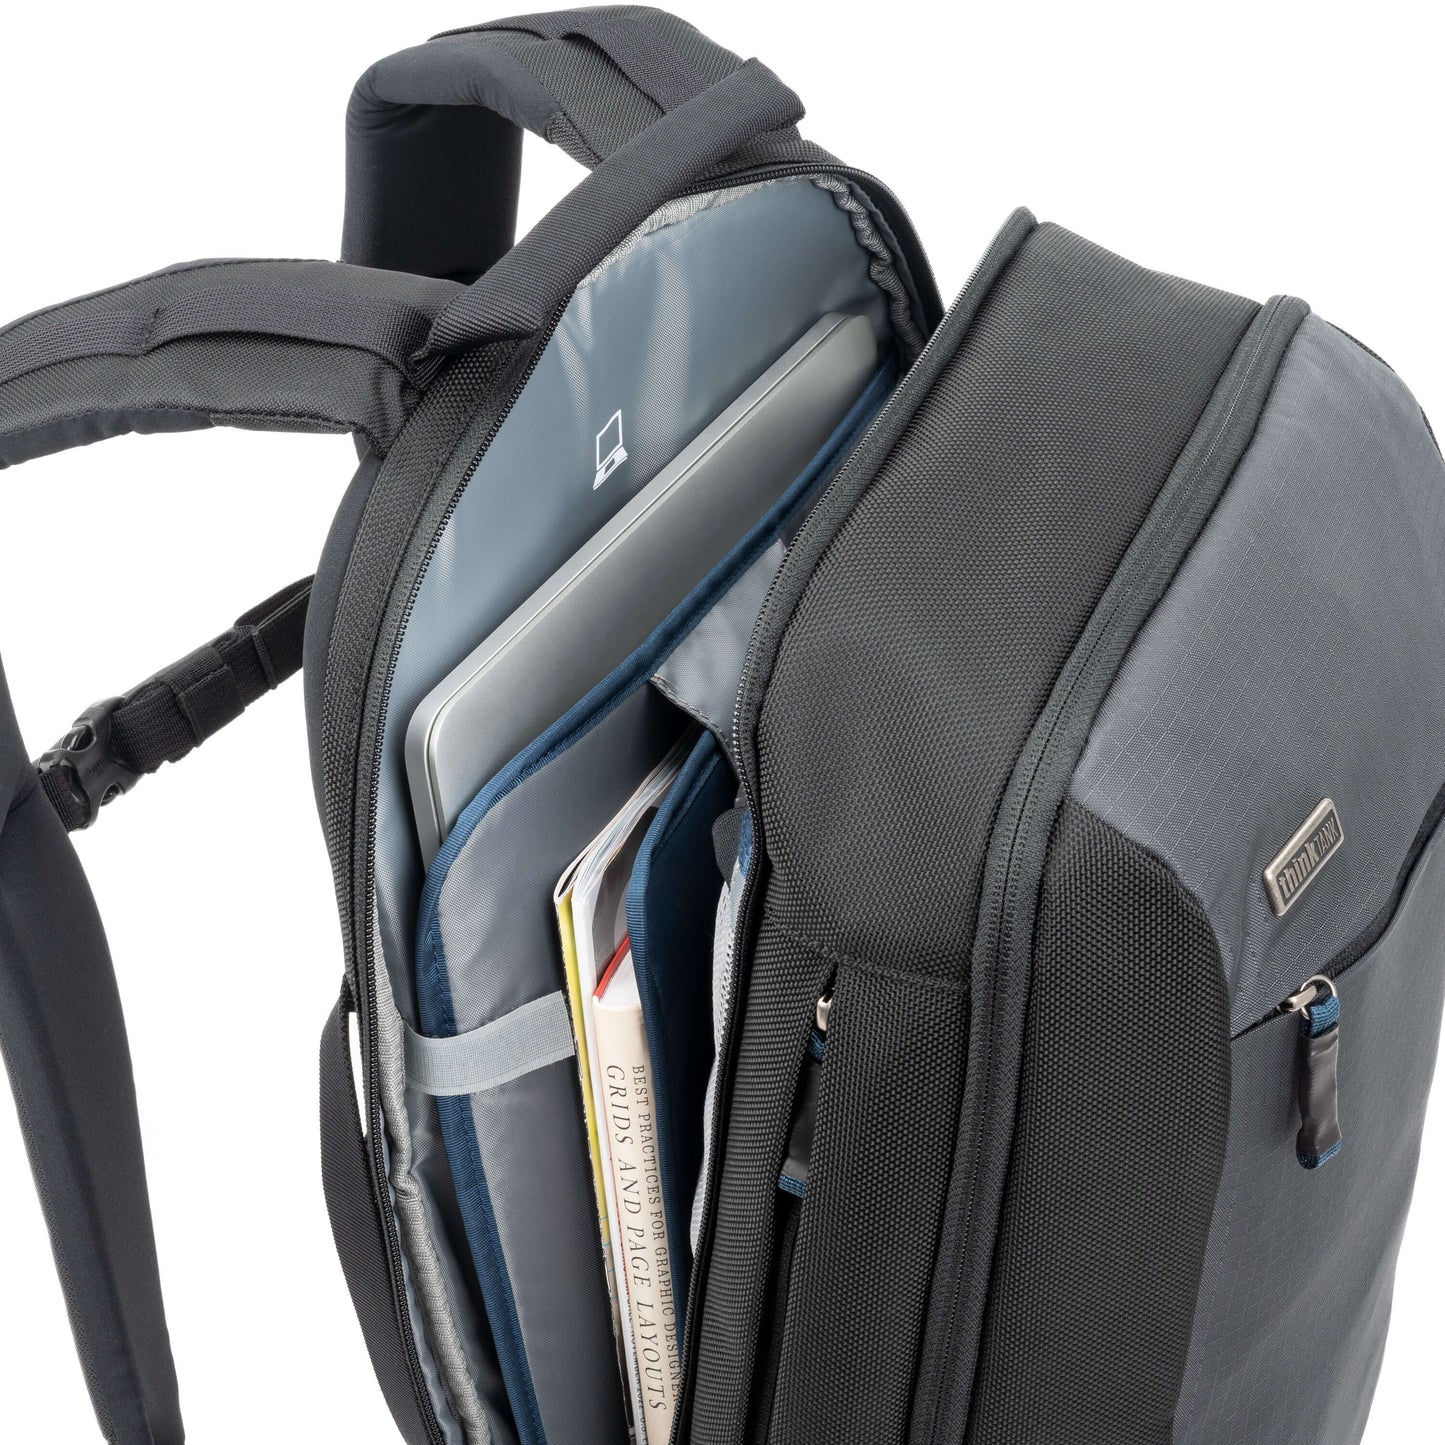 
                  
                    Swing-around side access allows you to easily reach a 16” laptop, tablet, books, magazines or paperwork
                  
                